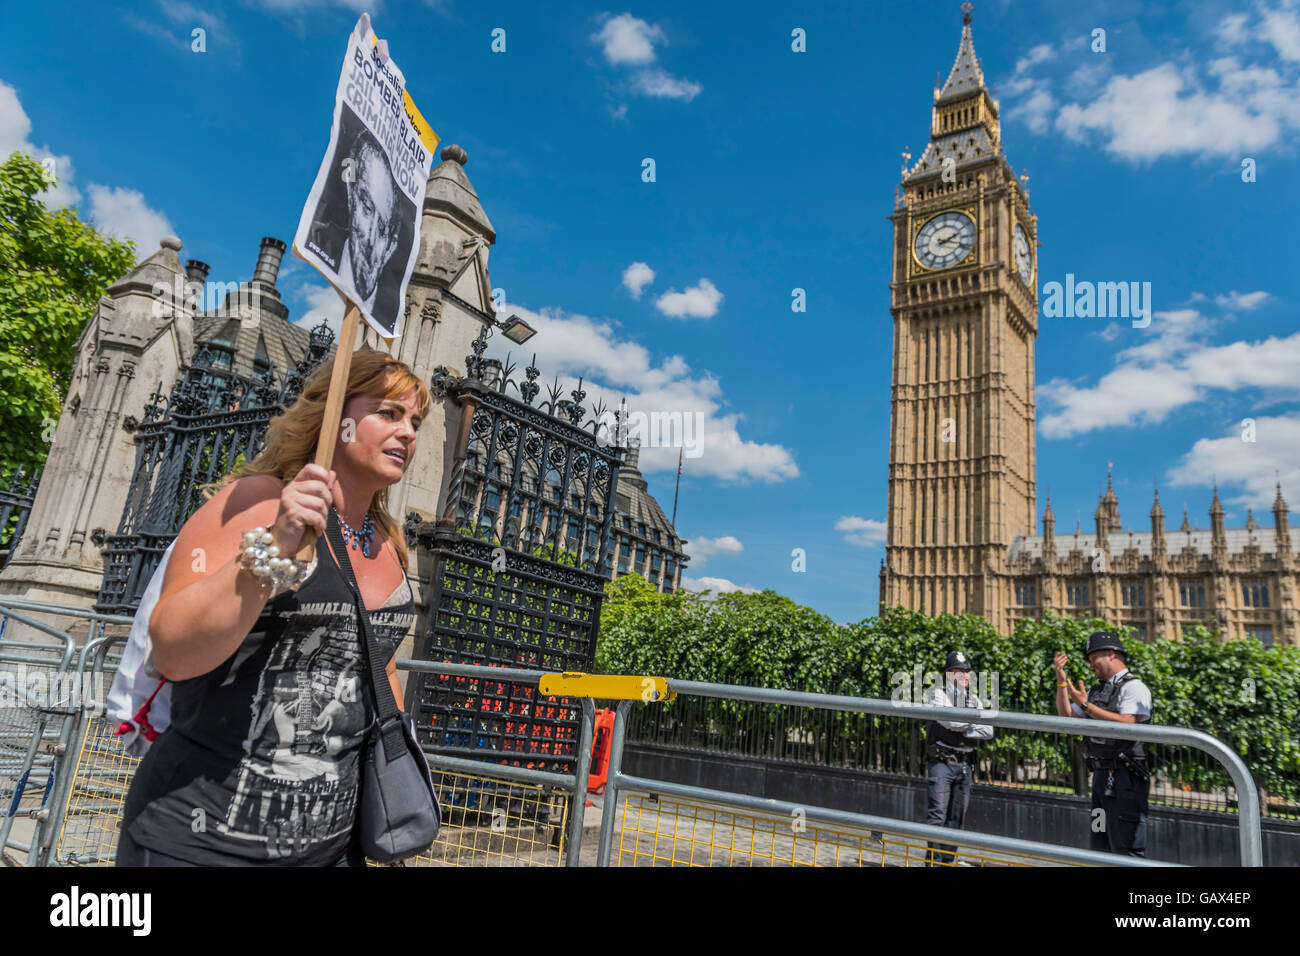 London, UK. 06th July, 2016. A passionate protestor makes a vocal protest in front of the gates to Parliamnet - The results of the Chilcot inquirty into the Iraq War bring protestors, against Tony Blair's part in it, to Parliament Square. Credit:  Guy Bell/Alamy Live News Stock Photo